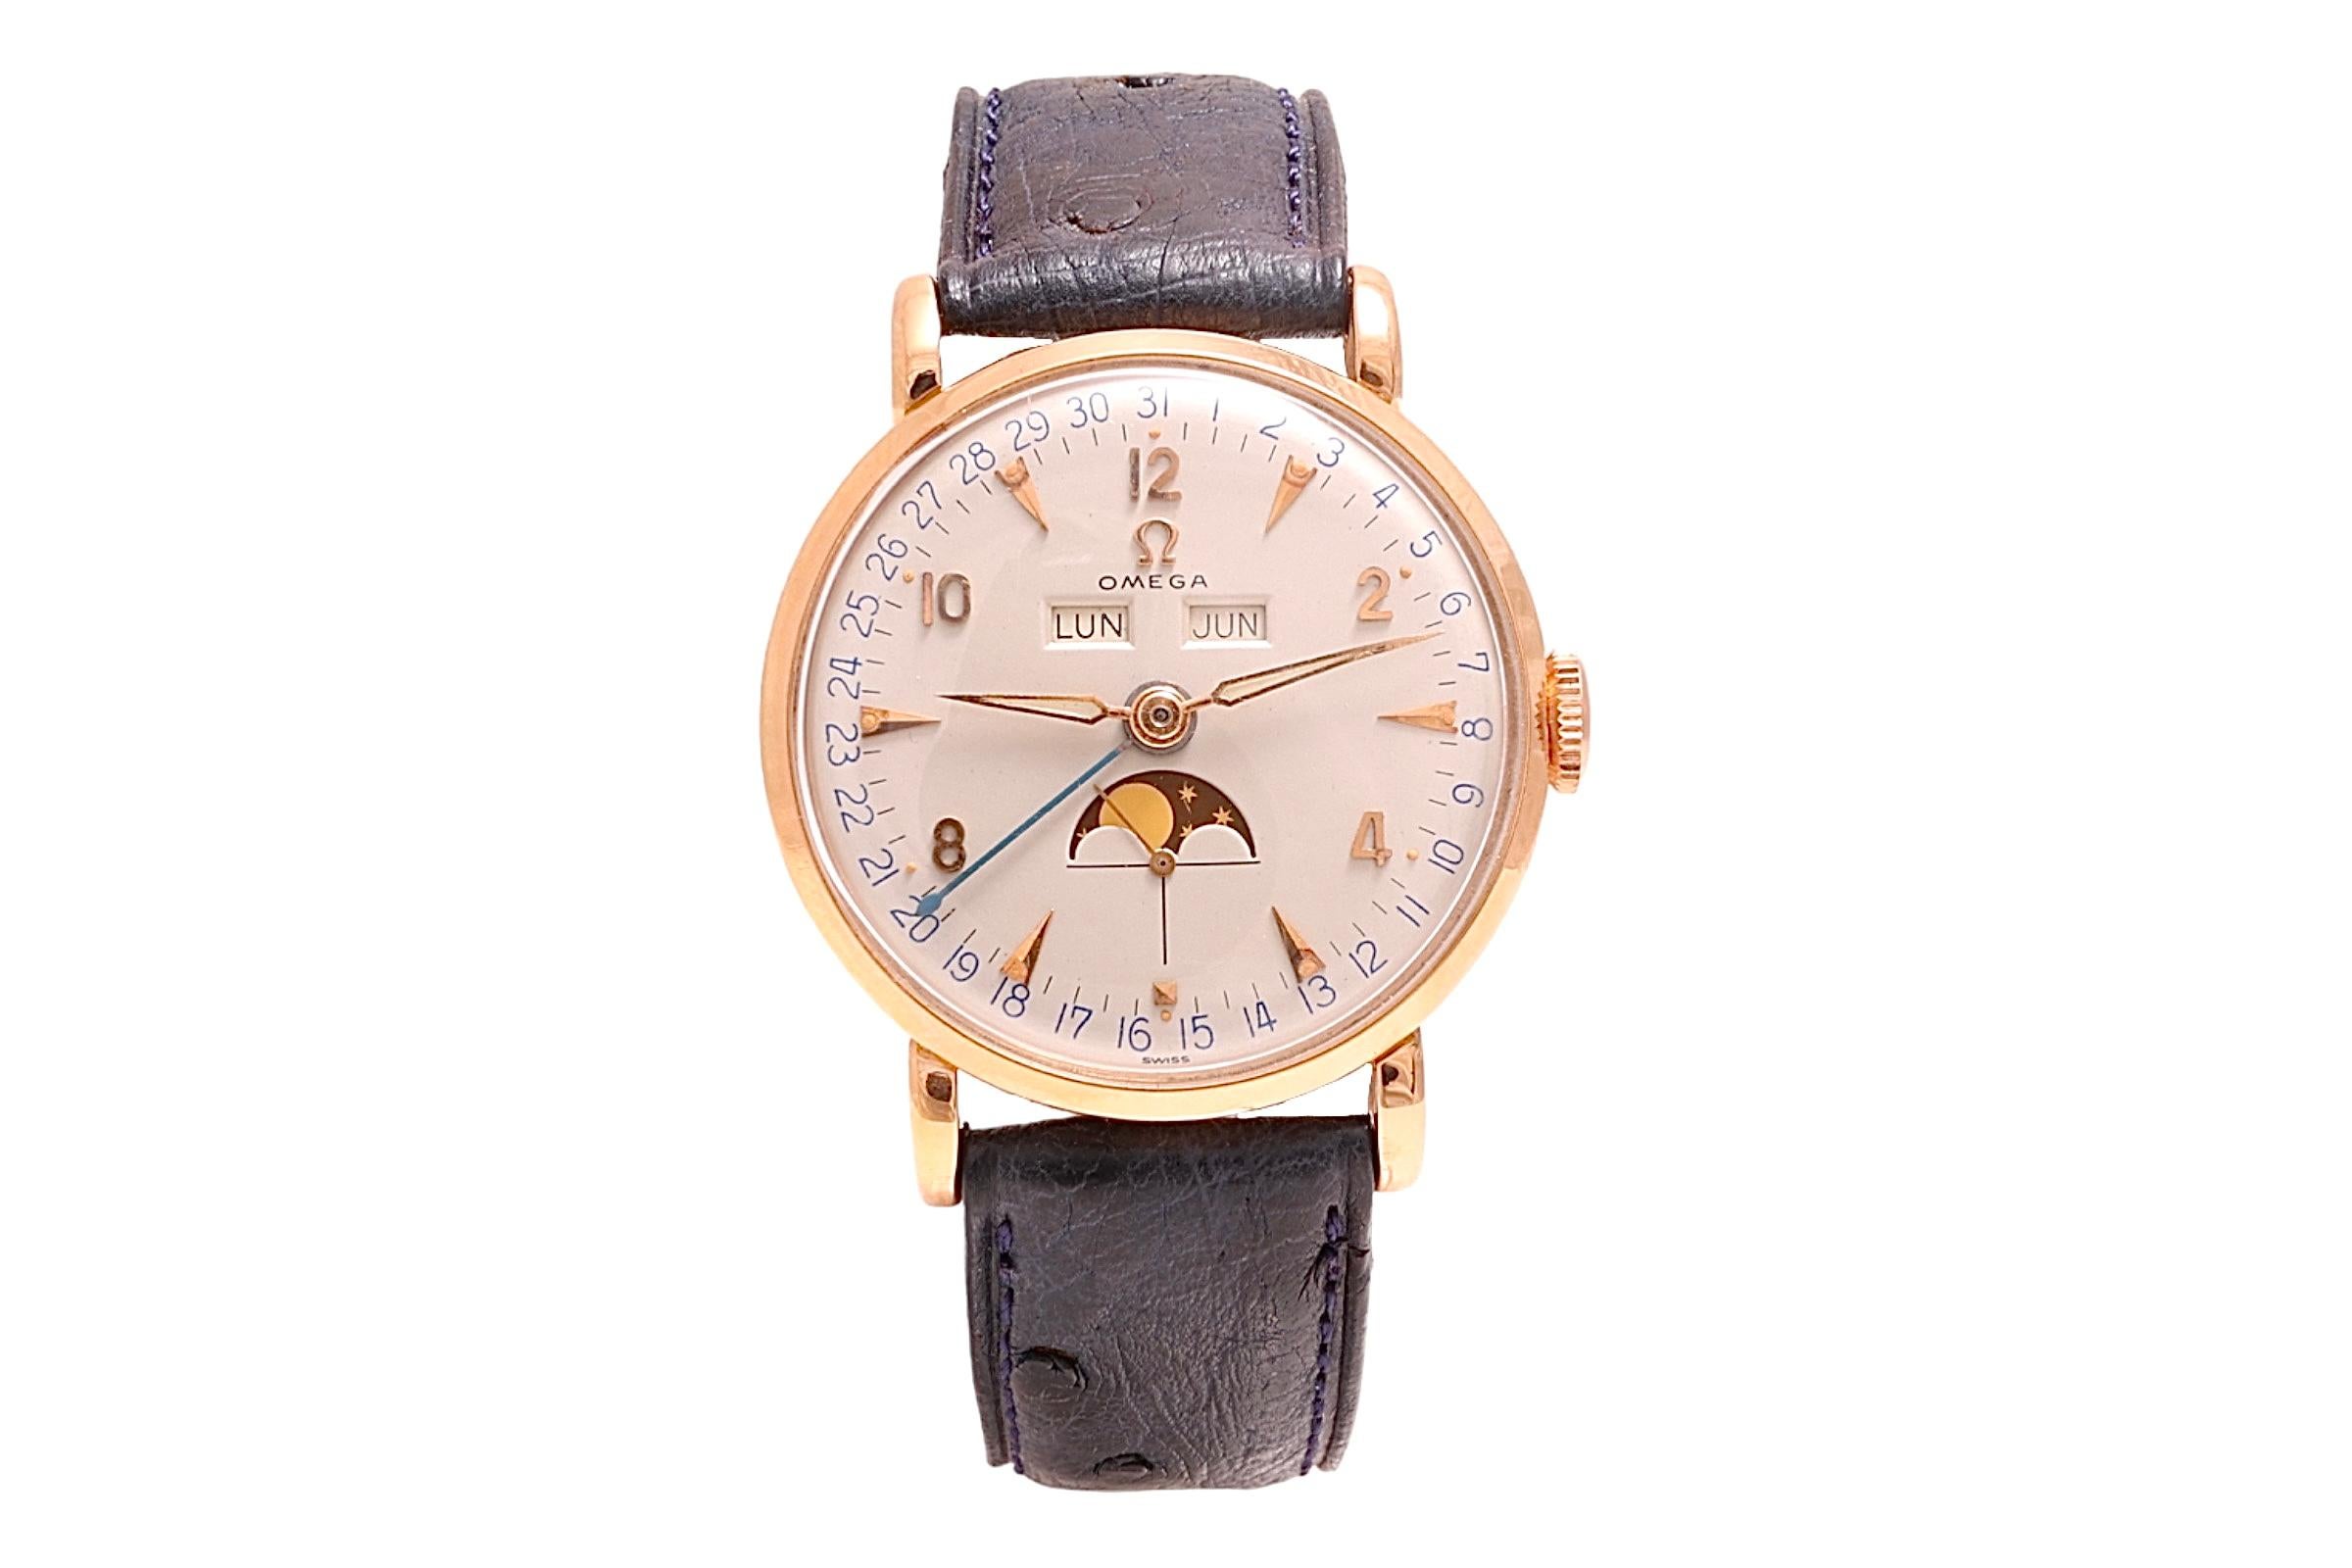 18 Kt Pink/ Rose Gold  Omega Cosmic Triple Date Moon Phase Collectors Wrist Watch Ref OT2473 with Omega Extract from the Archives.

Extremely rare and unseen collectors condition !

Movement : Mechanical Manual Winding , Caliber 381

Functions : Sub